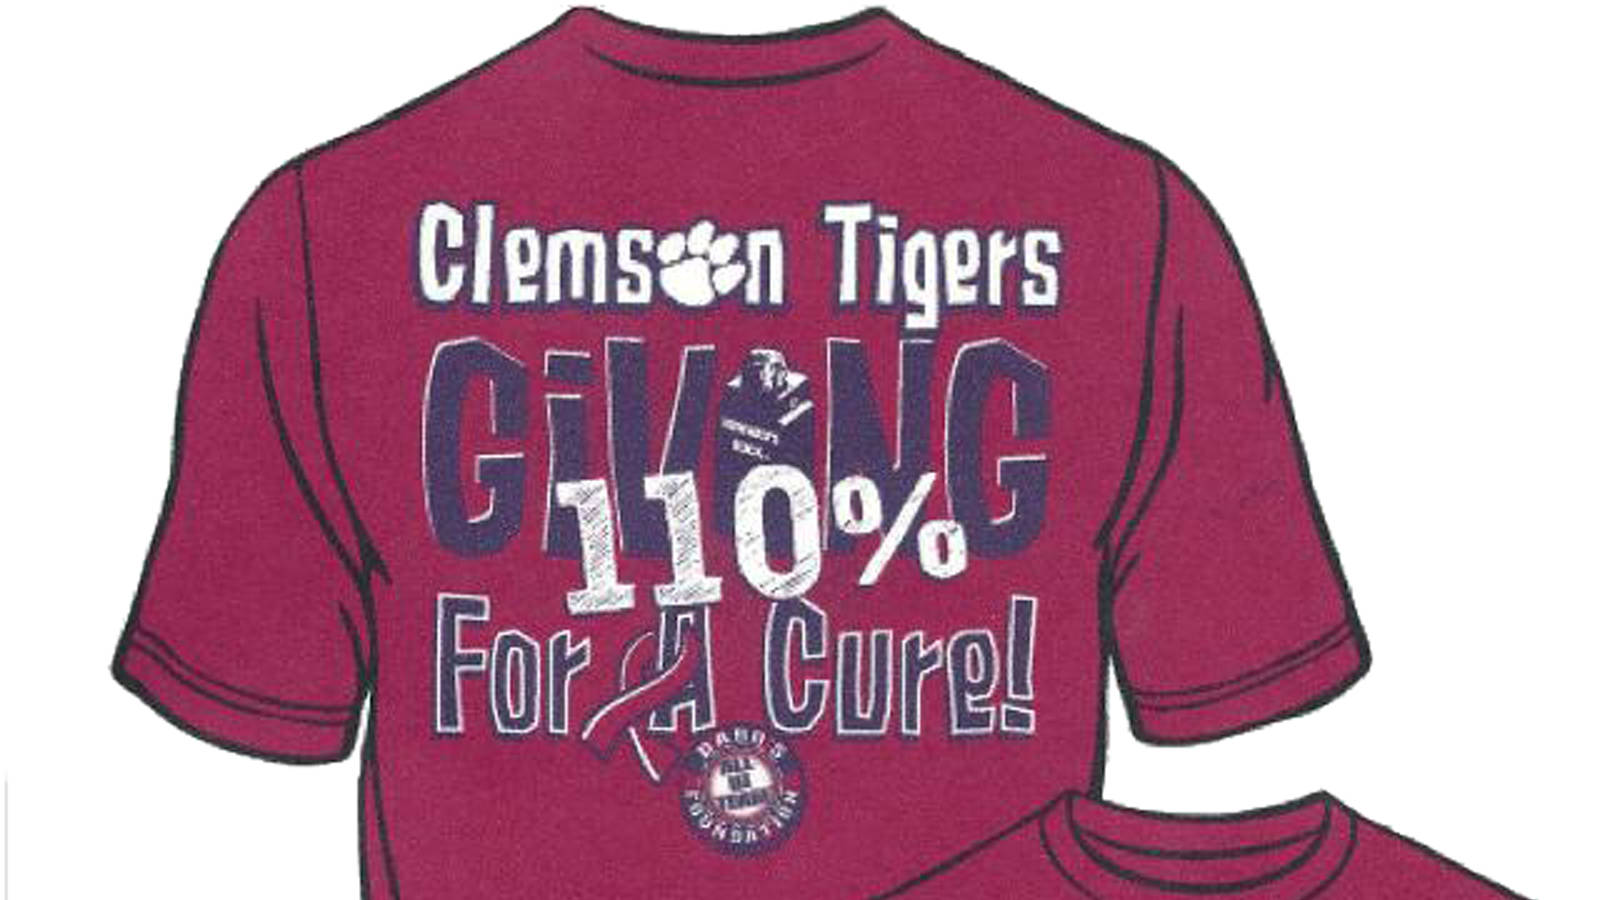 Join Dabo’s All In Team Foundation In the Fight Against Breast Cancer